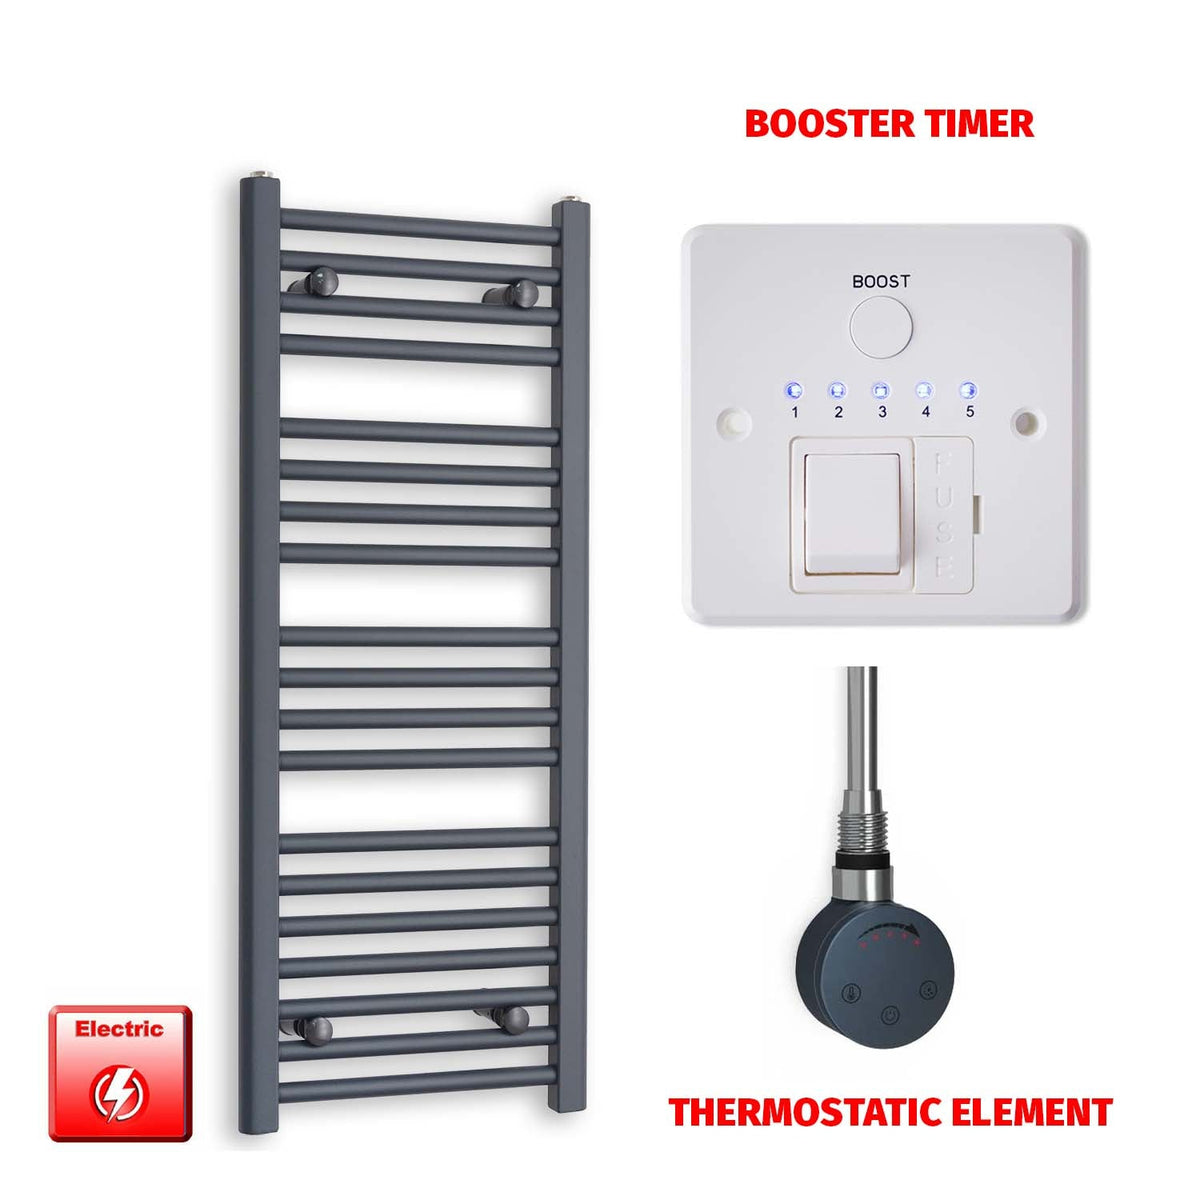 1000 x 400 Flat Anthracite Pre-Filled Electric Heated Towel Radiator HTR SMR Thermostatic element Booster timer